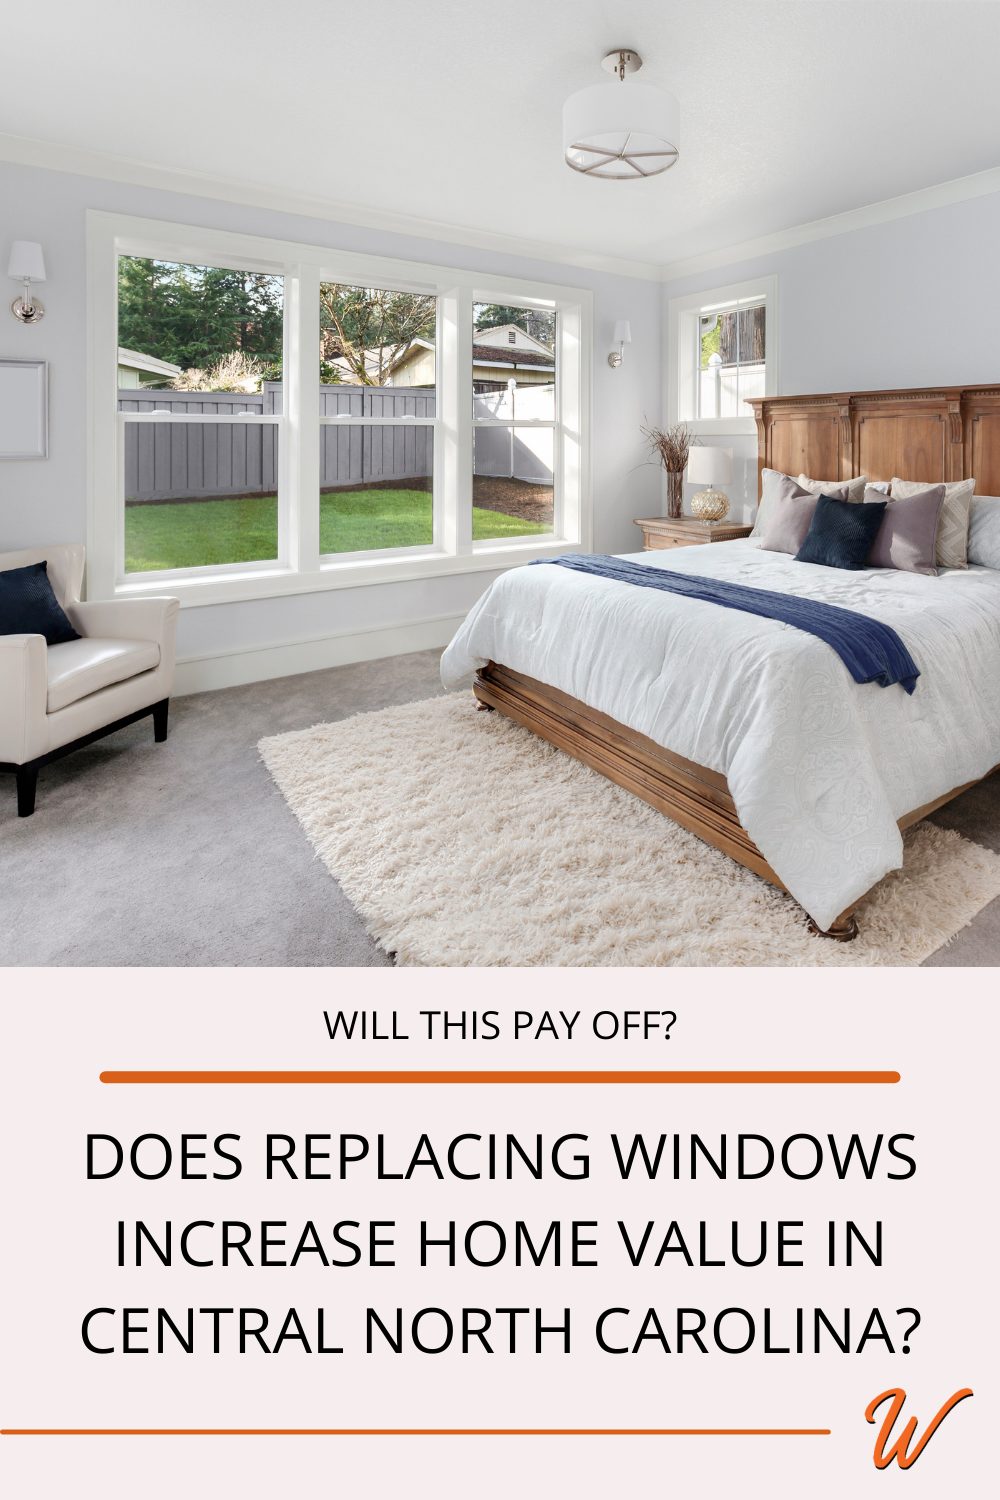 Interior of a bedroom with a triple unit of double hung windows captioned with "Will this pay off? Does replacing windows increase home value in central North Carolina?"